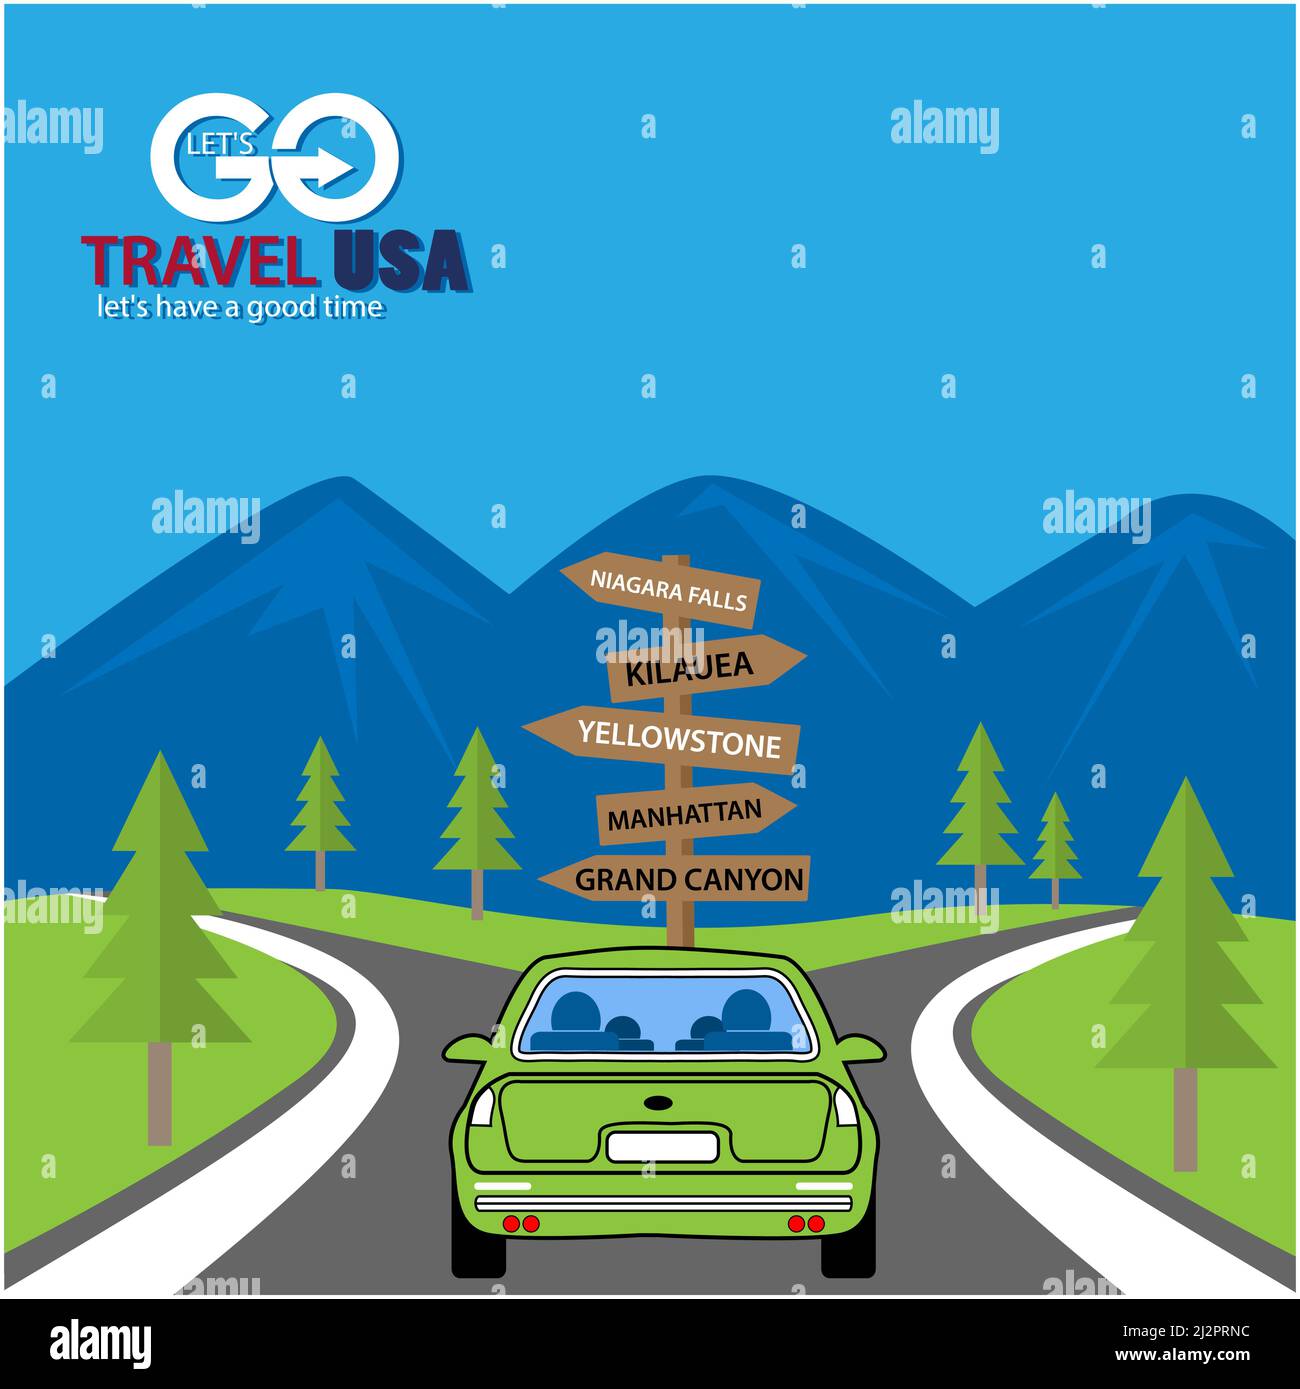 Travel in the United States concept. Wooden sign indicating the direction of tourist attractions in the United States. Stock Vector